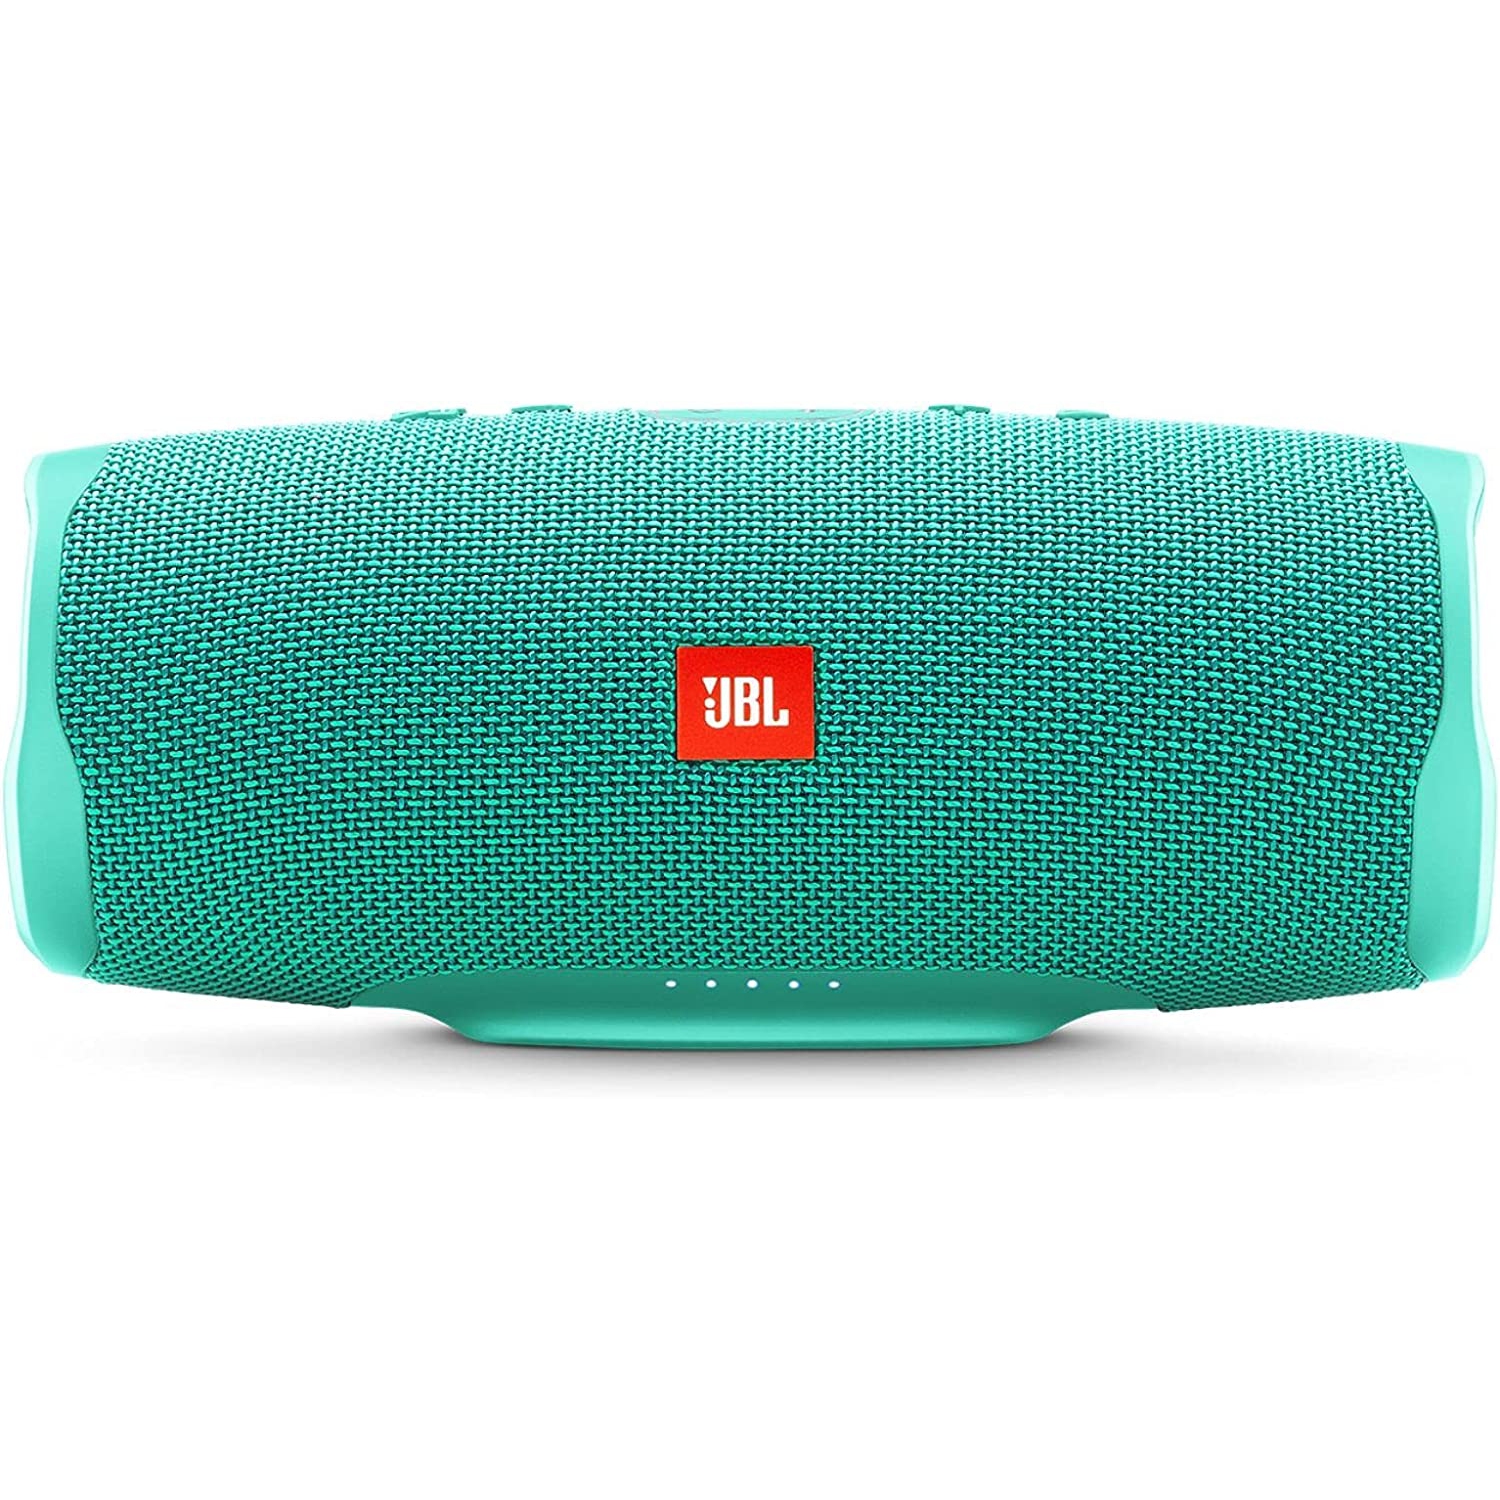 Refurbished (Excellent) - JBL Charge 4 Portable Waterproof Wireless Bluetooth Speaker with up to 20 Hours of Battery Life - Teal